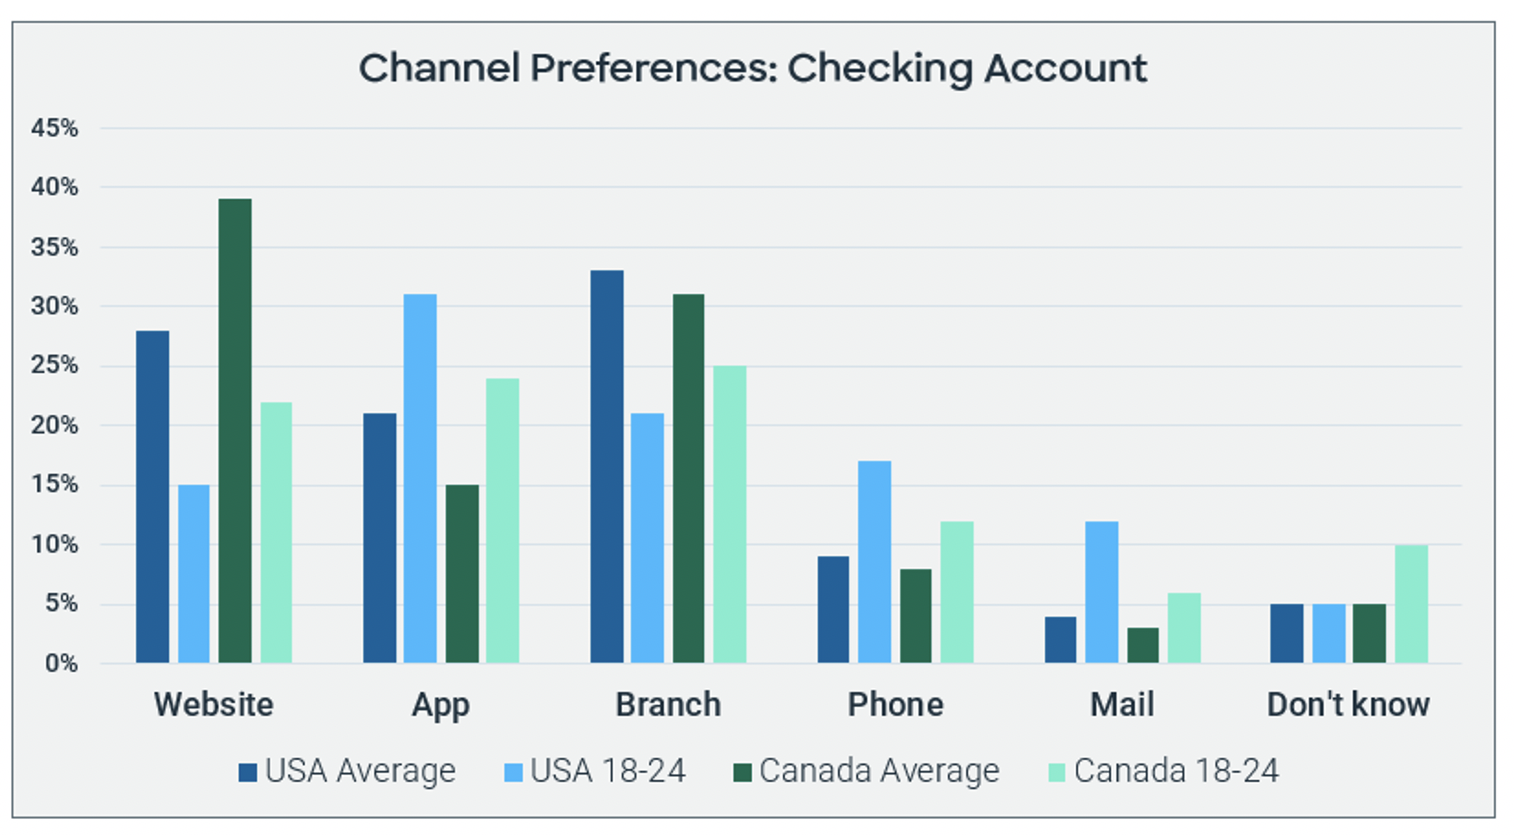 Channel preferences: checking account